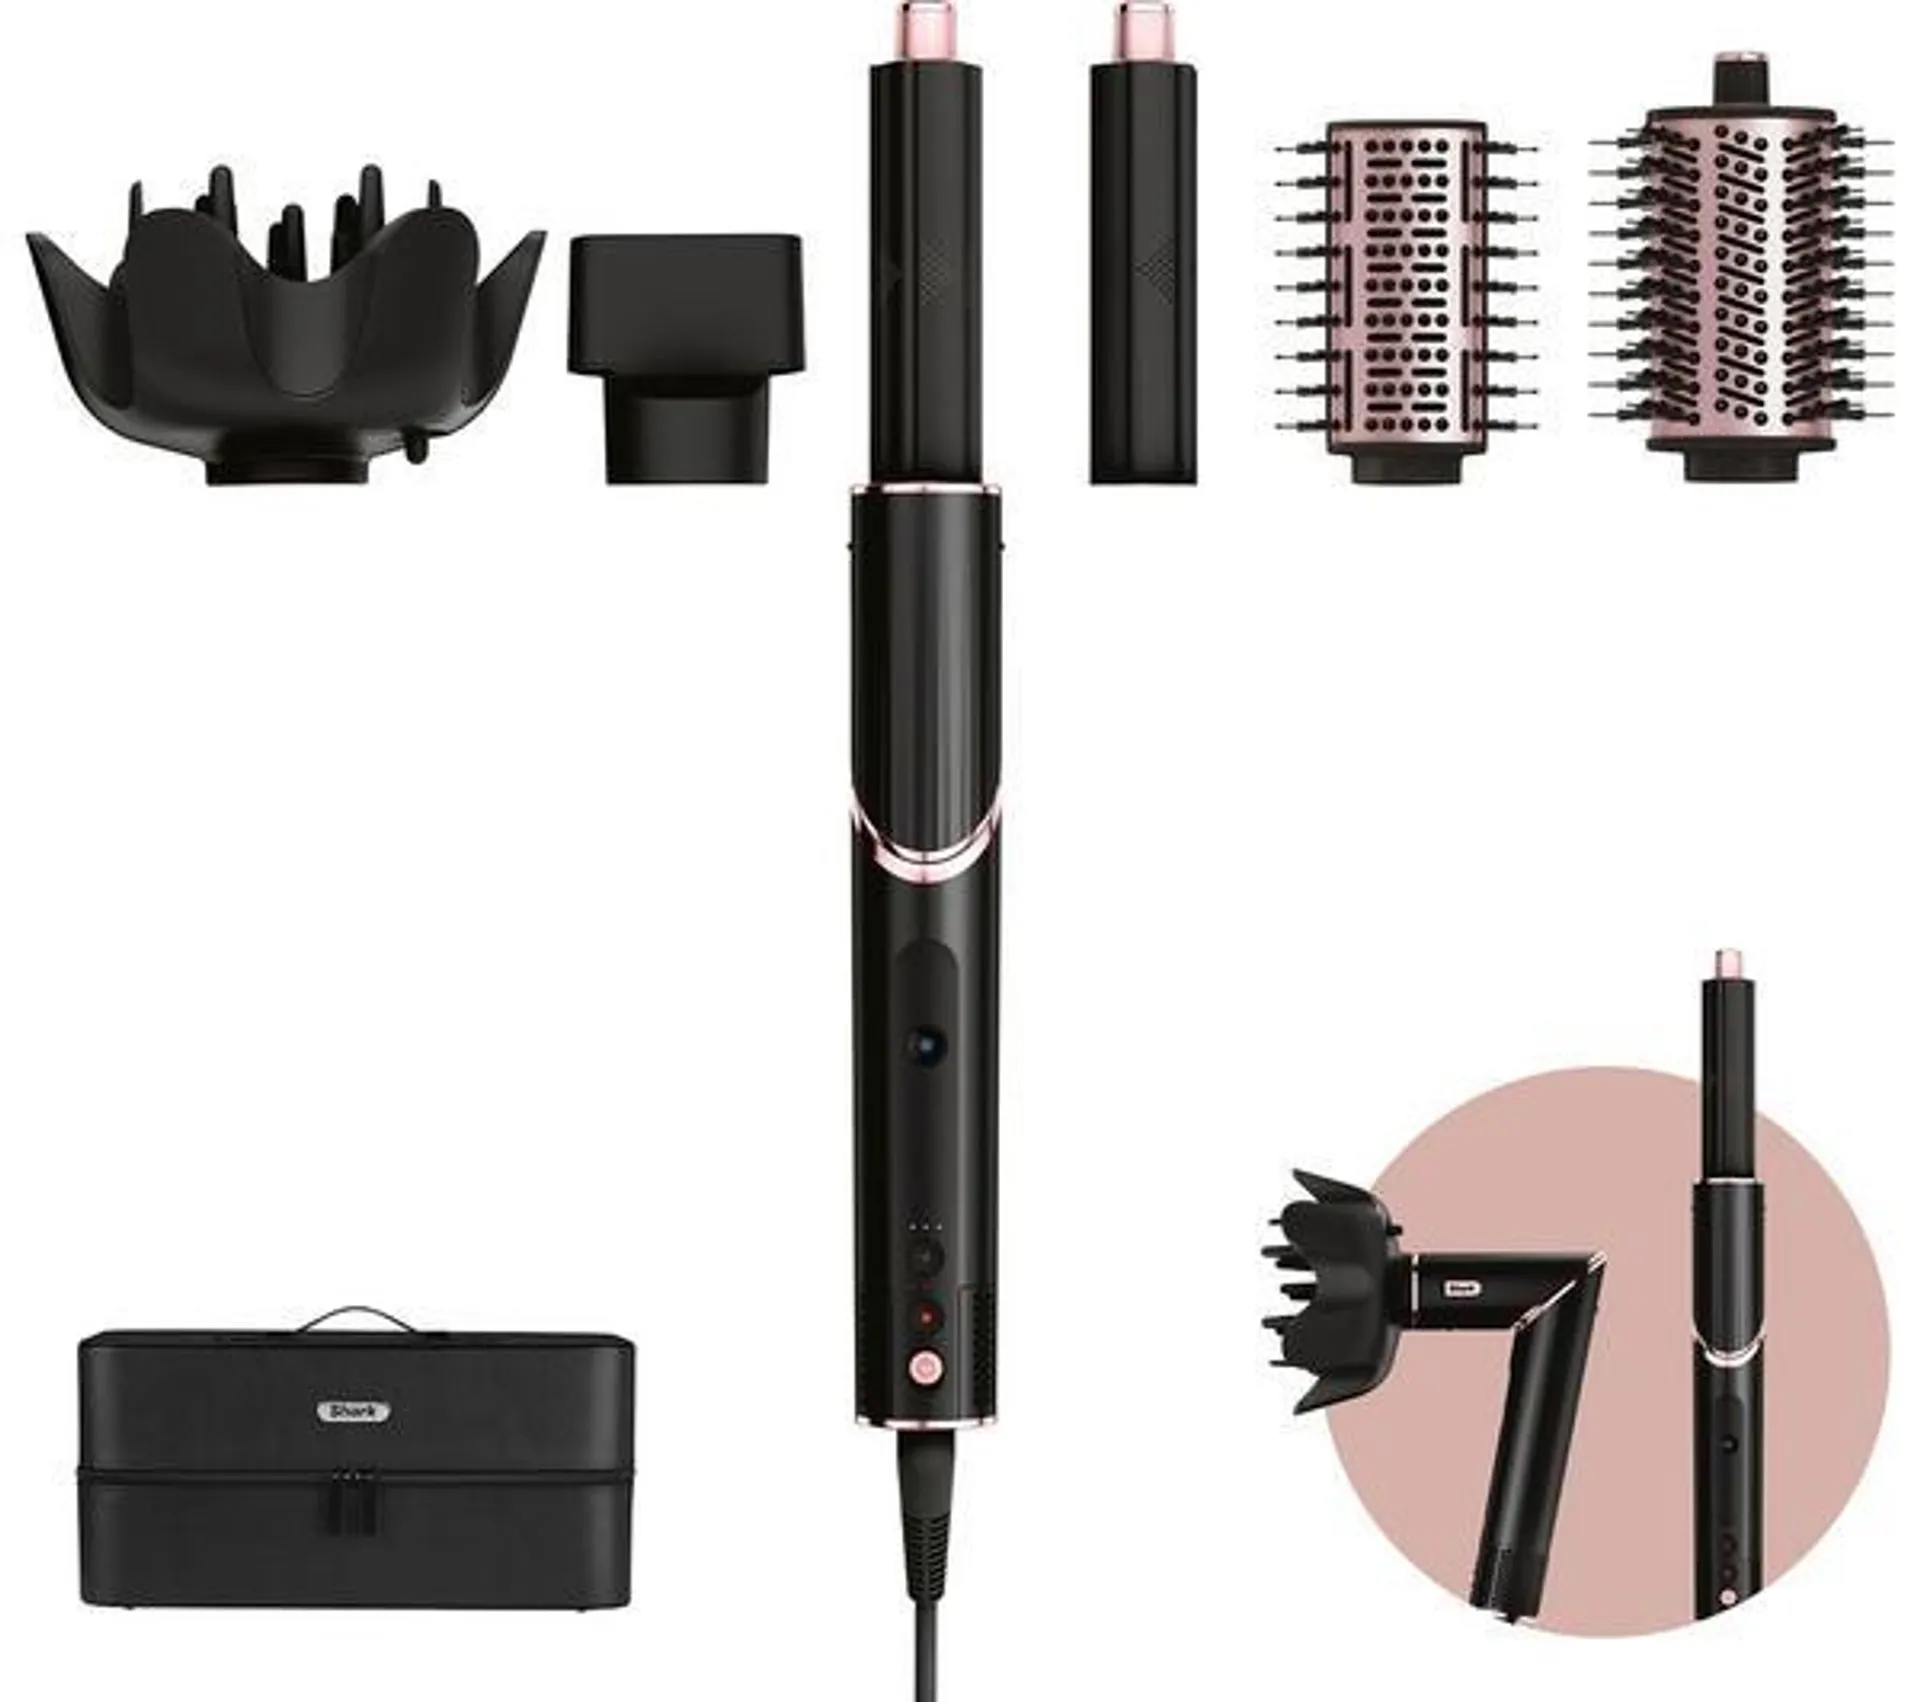 SHARK HD440UK FlexStyle 5-in-1 Air Styler & Hair Dryer with Storage Case - Black & Rose Gold